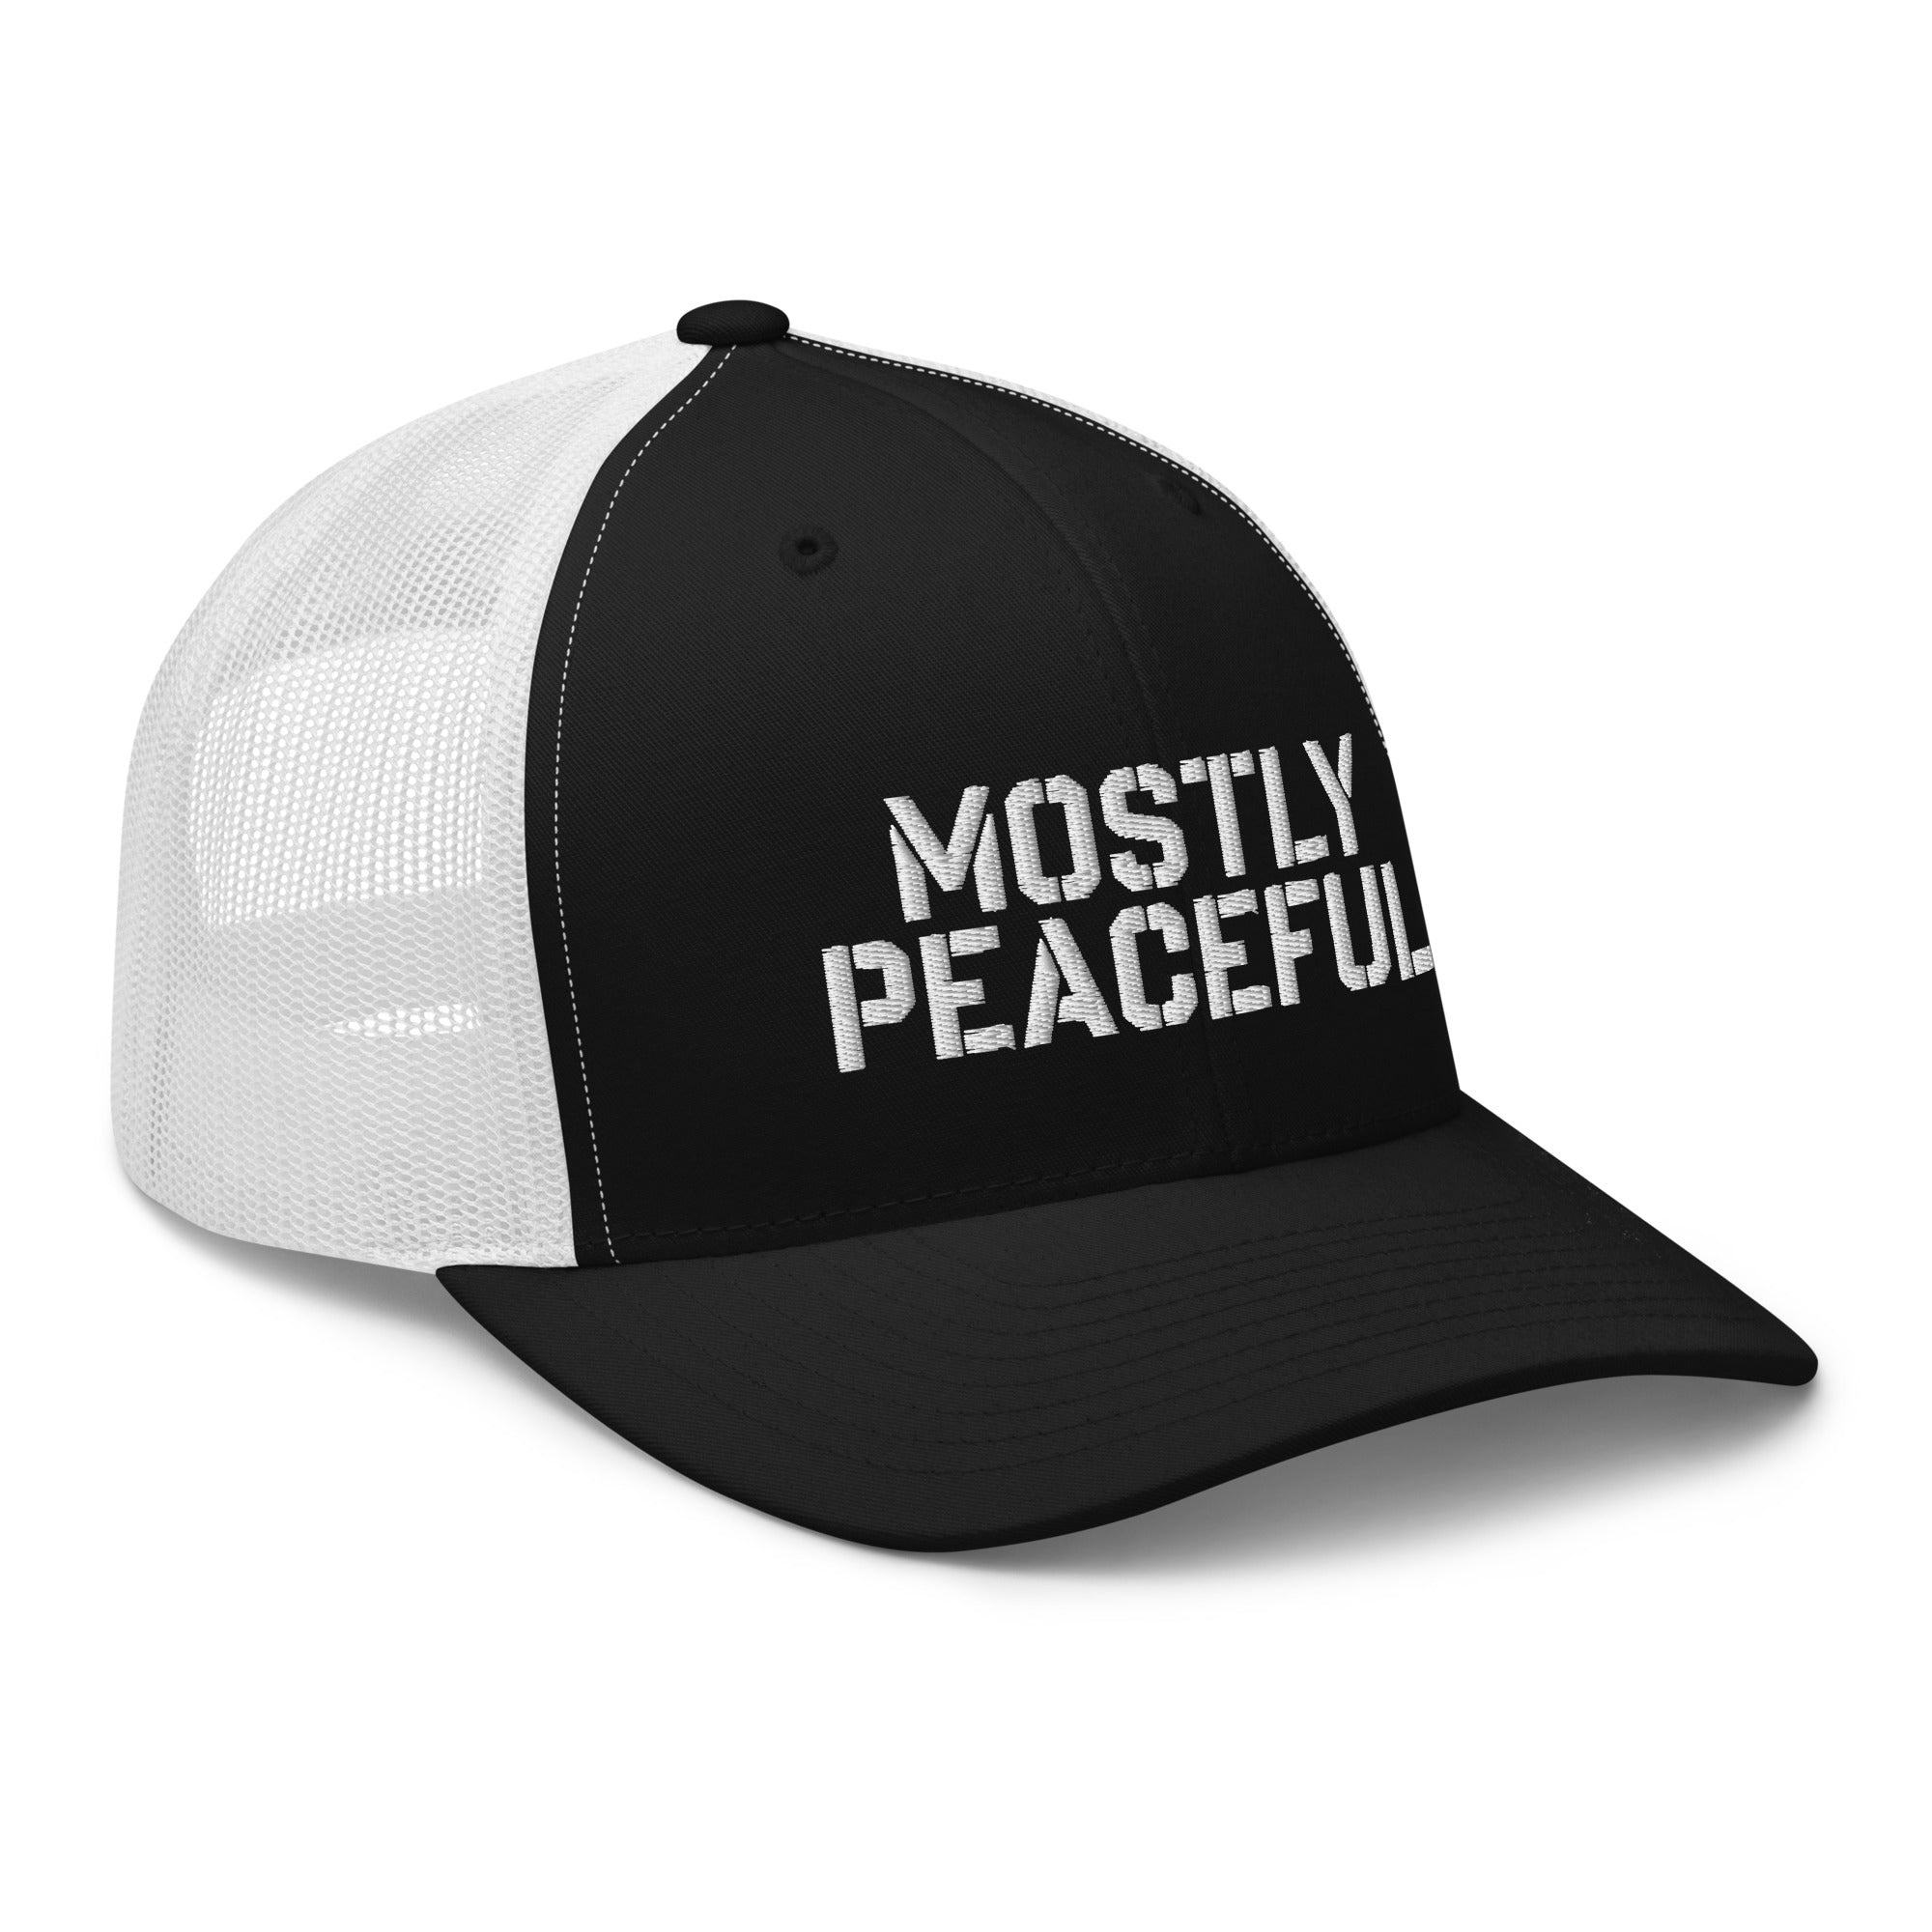 Mostly Peaceful Trucker Cap